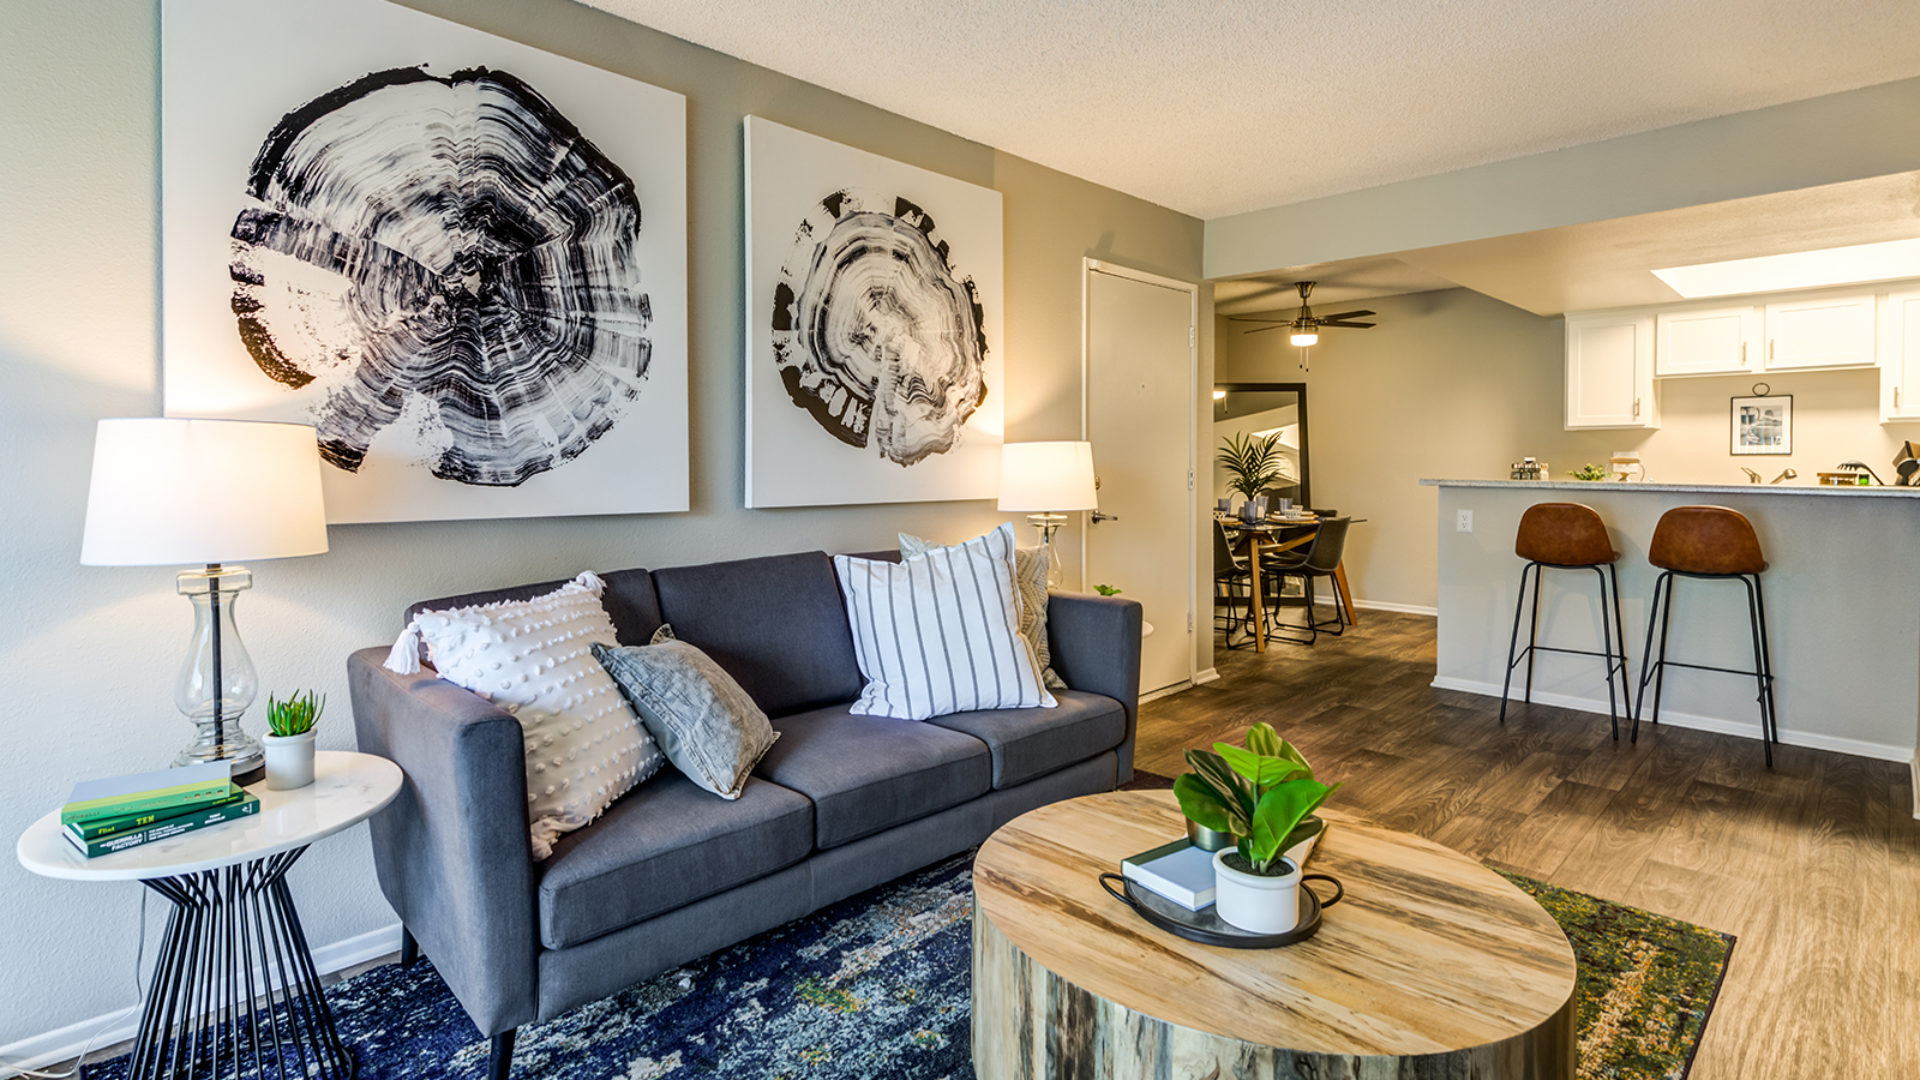 renew-mills-apartment-homes-for-rent-ontario-ca-91761-living-room-couch